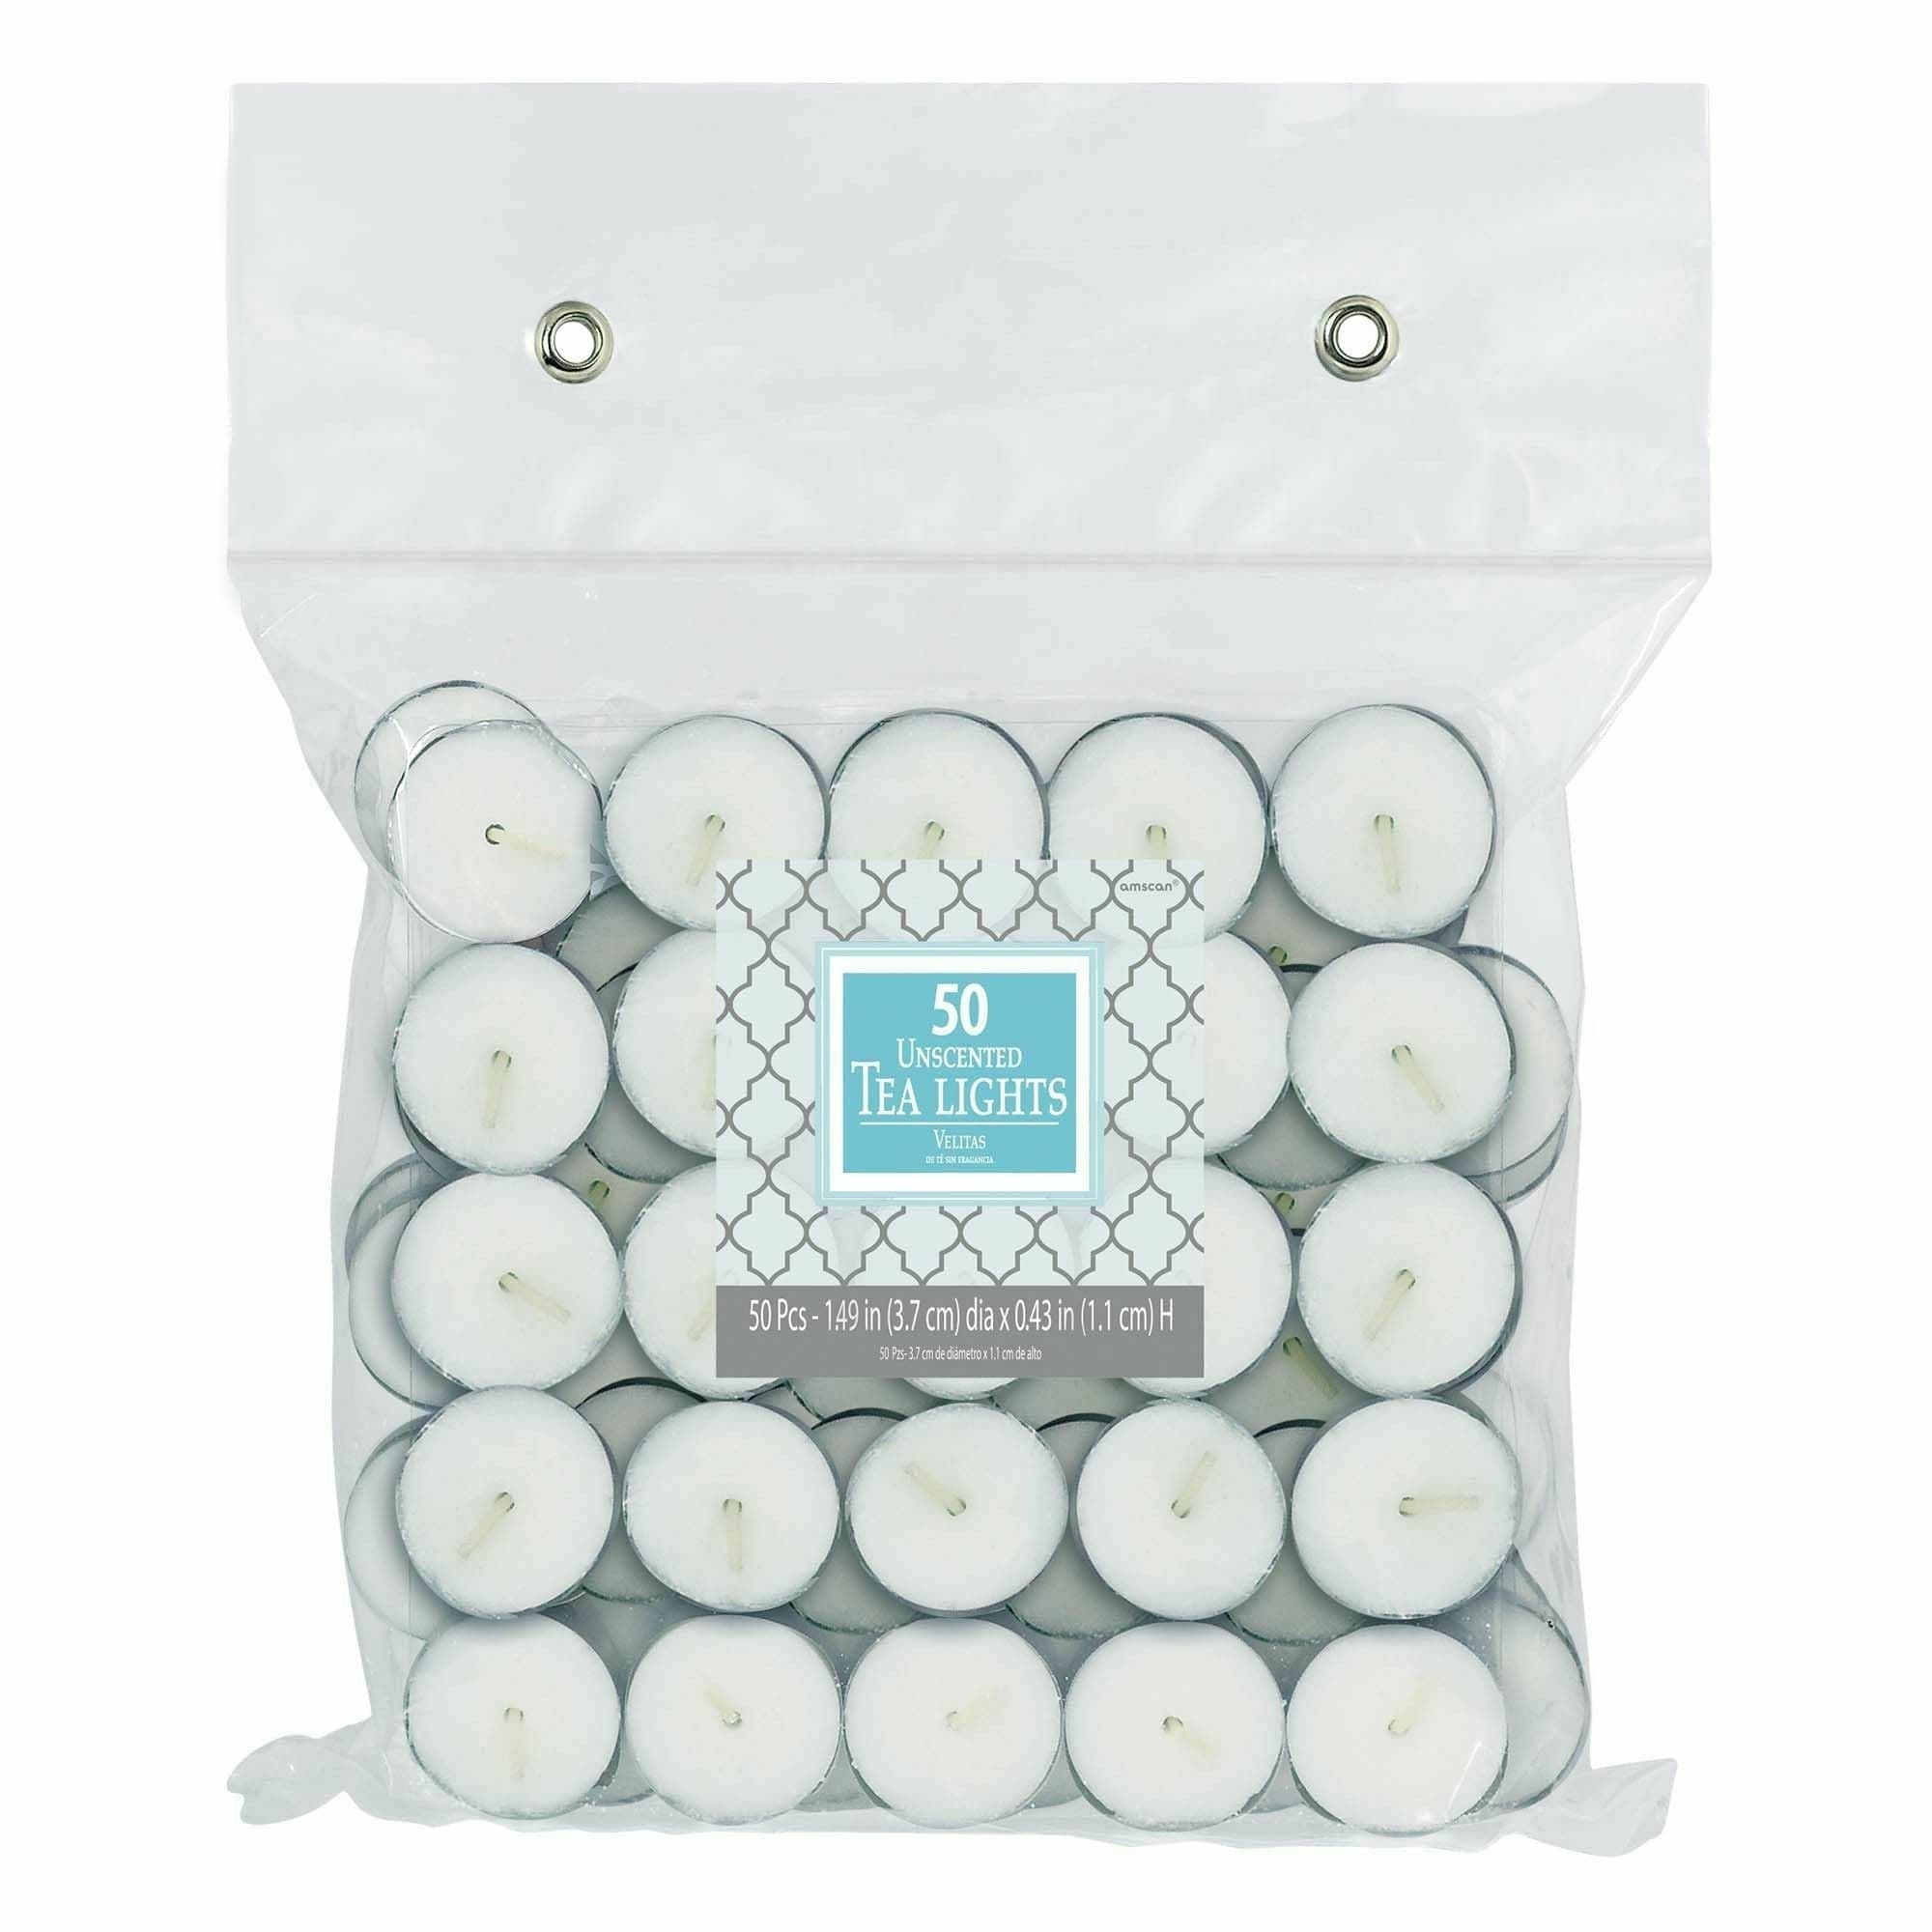 Amscan WEDDING Unscented Tealight Candles